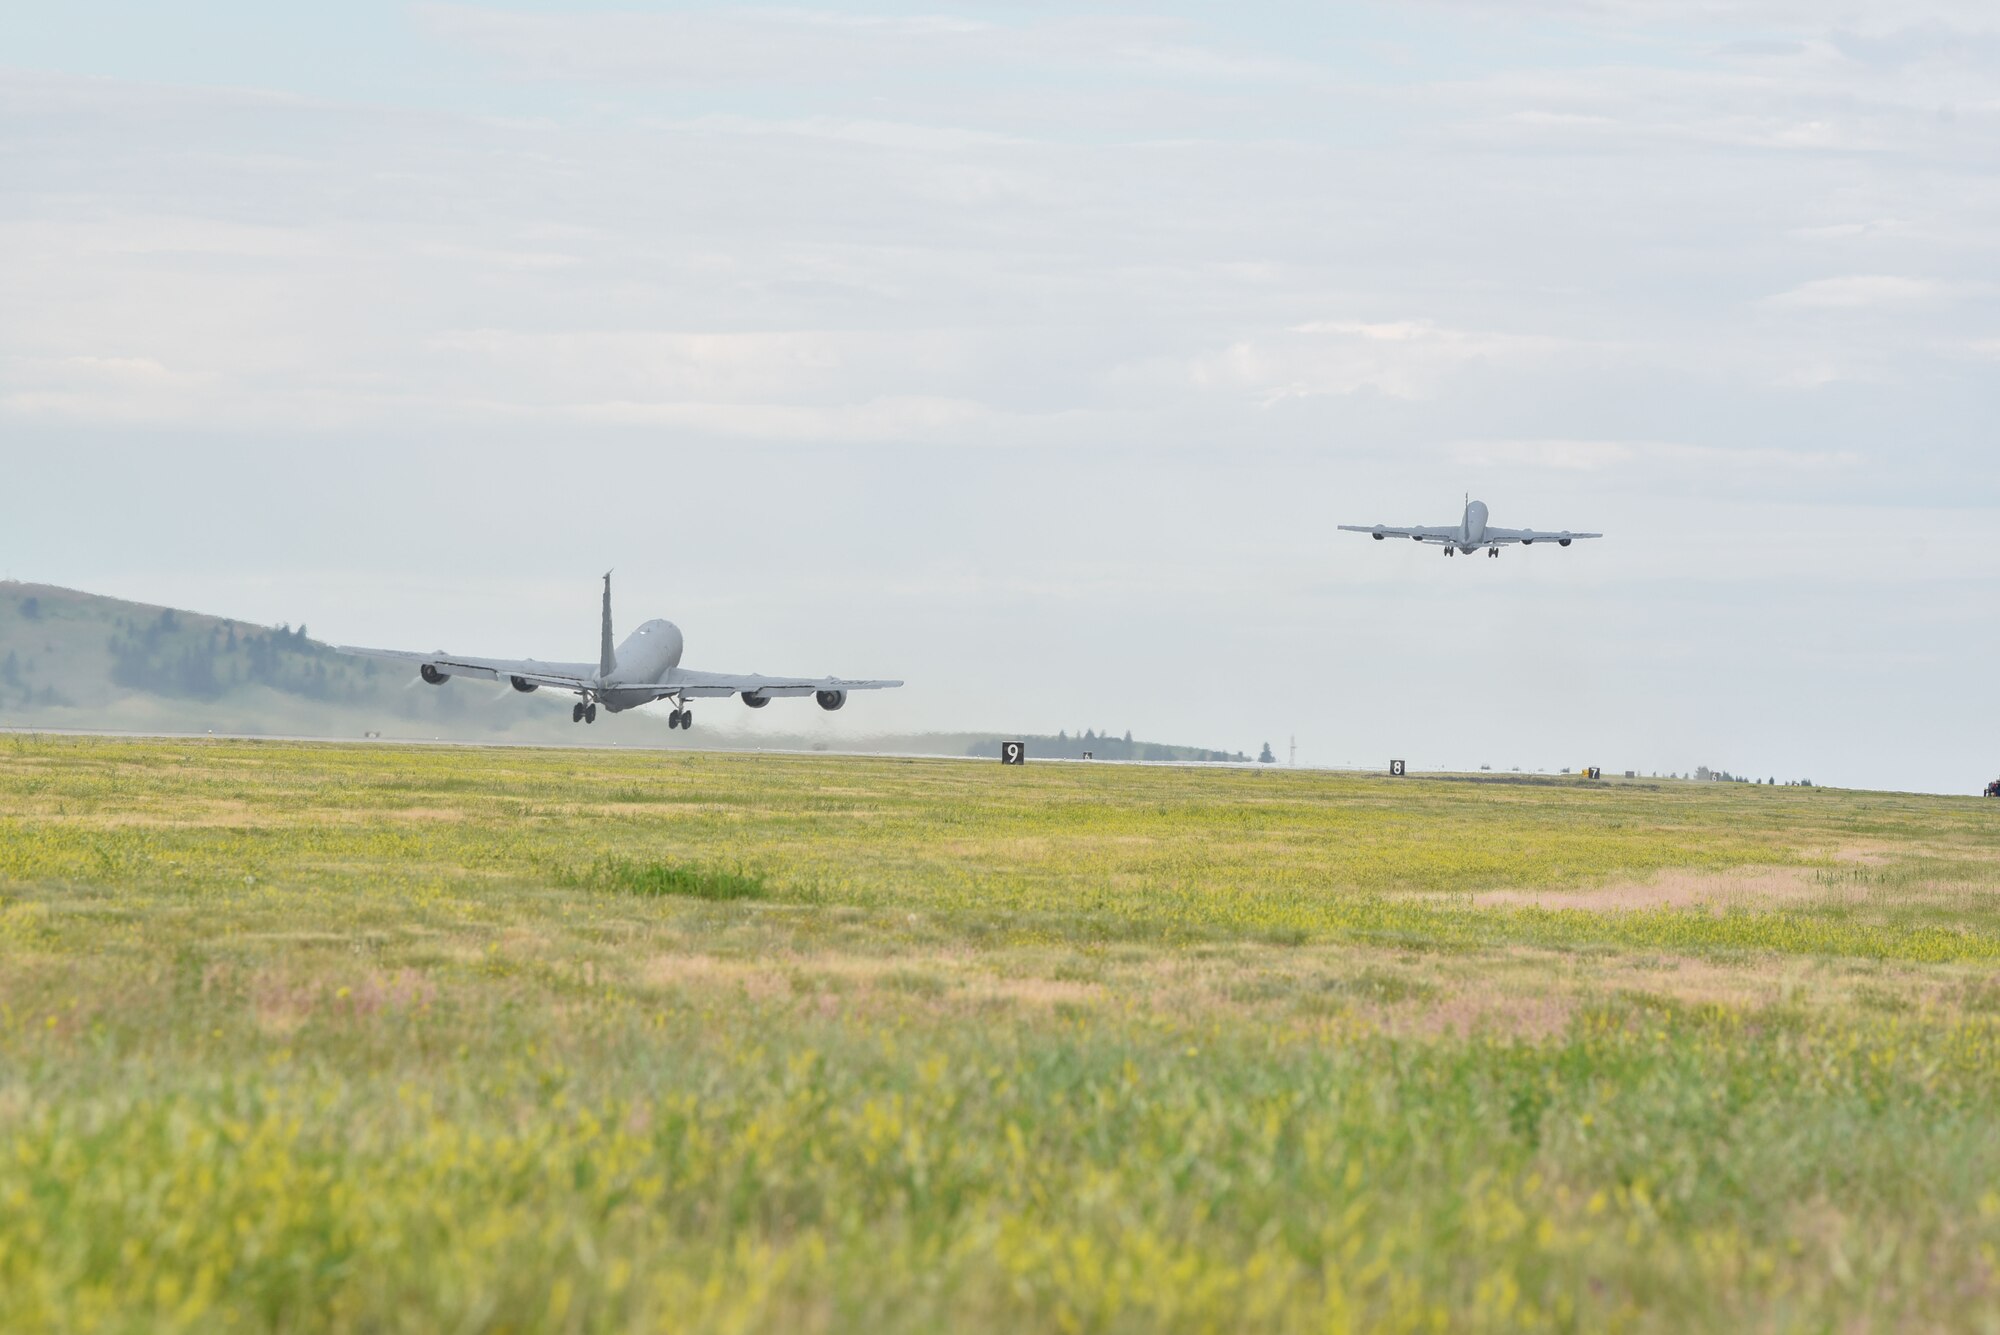 KC-135 Stratotankers assigned to the 92nd Air Refueling Wing and 141st Air Refueling Wing conduct minimum-interval takeoffs as part of Operation Centennial Contact at Fairchild Air force Base, Washington, June 27, 2023. The movement, which included stops at Yellowstone National Park, Mount Rushmore and Glacier National Park, was part of Air Mobility Command’s celebration of 100 years air refueling operations and demonstrated the 92nd Air Refueling Wing’s global reach capabilities. Since its inception in 1923, Air refueling has become a crucial component of military and civilian aviation operations around the world by extending the range and endurance of aircraft and enabling them to complete missions that would otherwise be impossible or require multiple stops. As a result, this capability is essential for strategic and tactical operations, as well as humanitarian relief efforts in support of AMC, U.S. Transportation Command and Department of Defense priorities. (U.S. Air Force photo by Airman 1st Class Lillian Patterson)